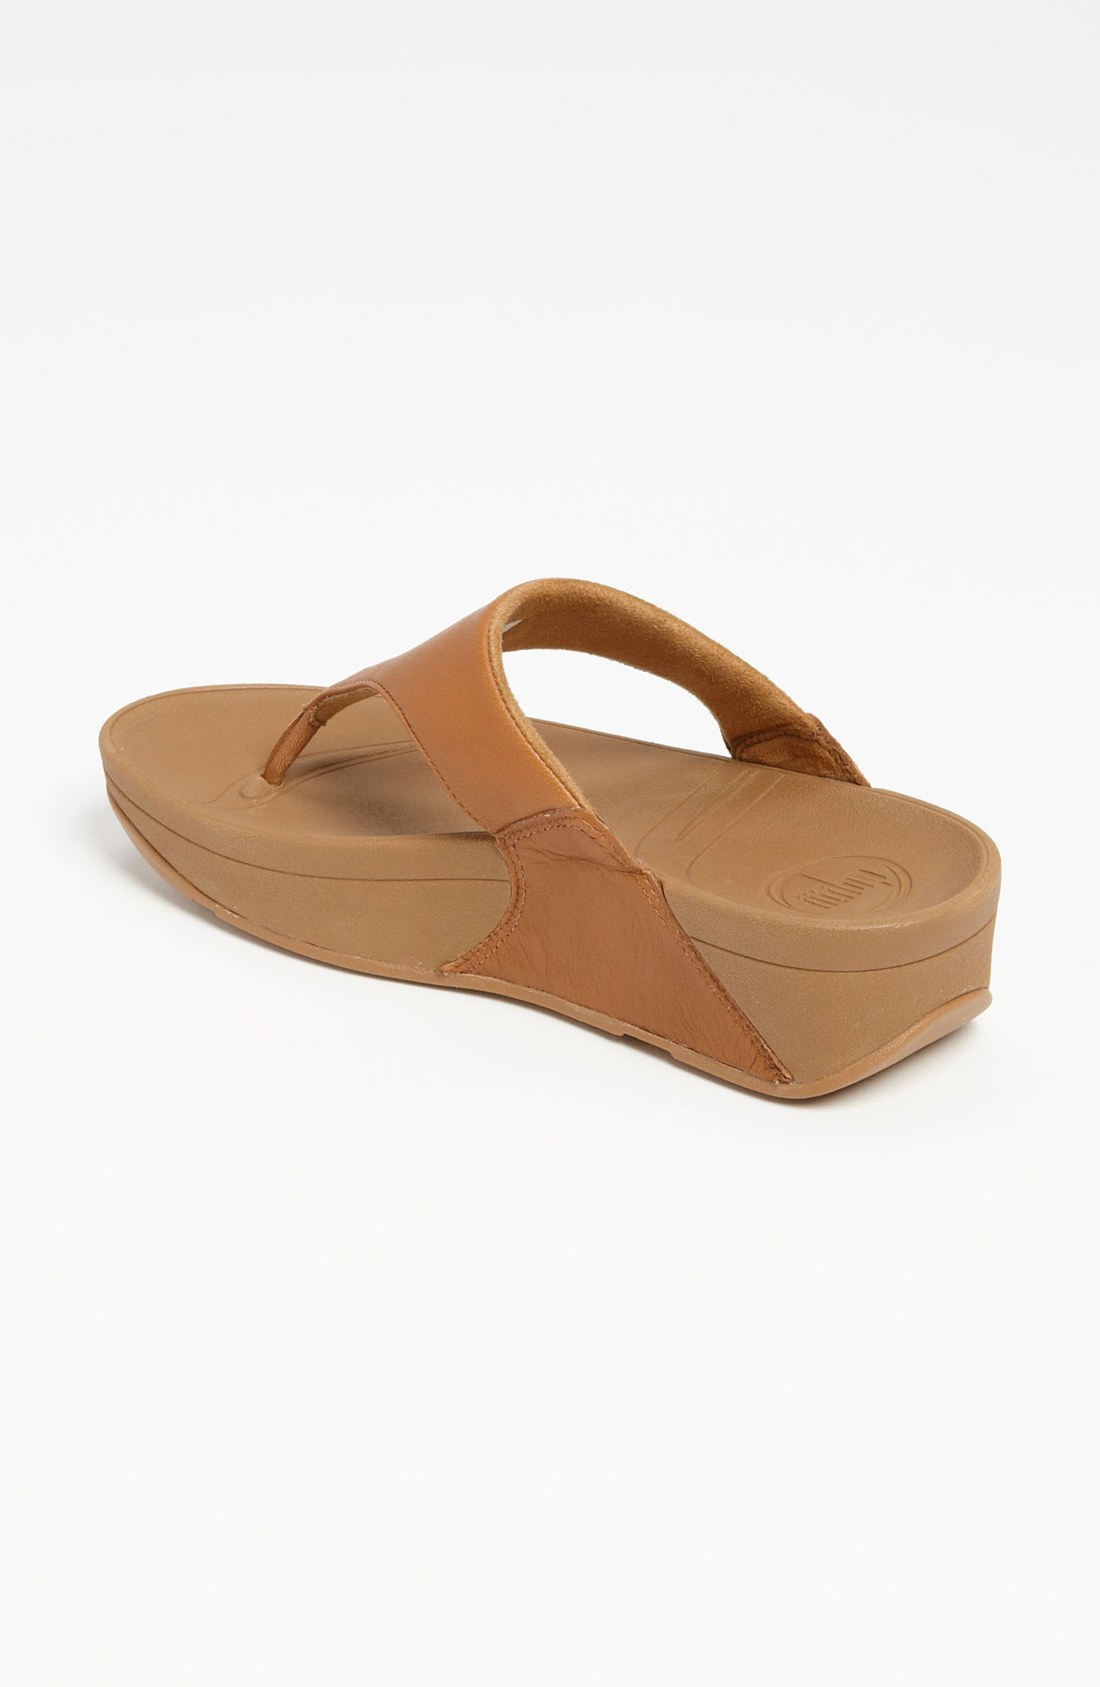 fitflop asos